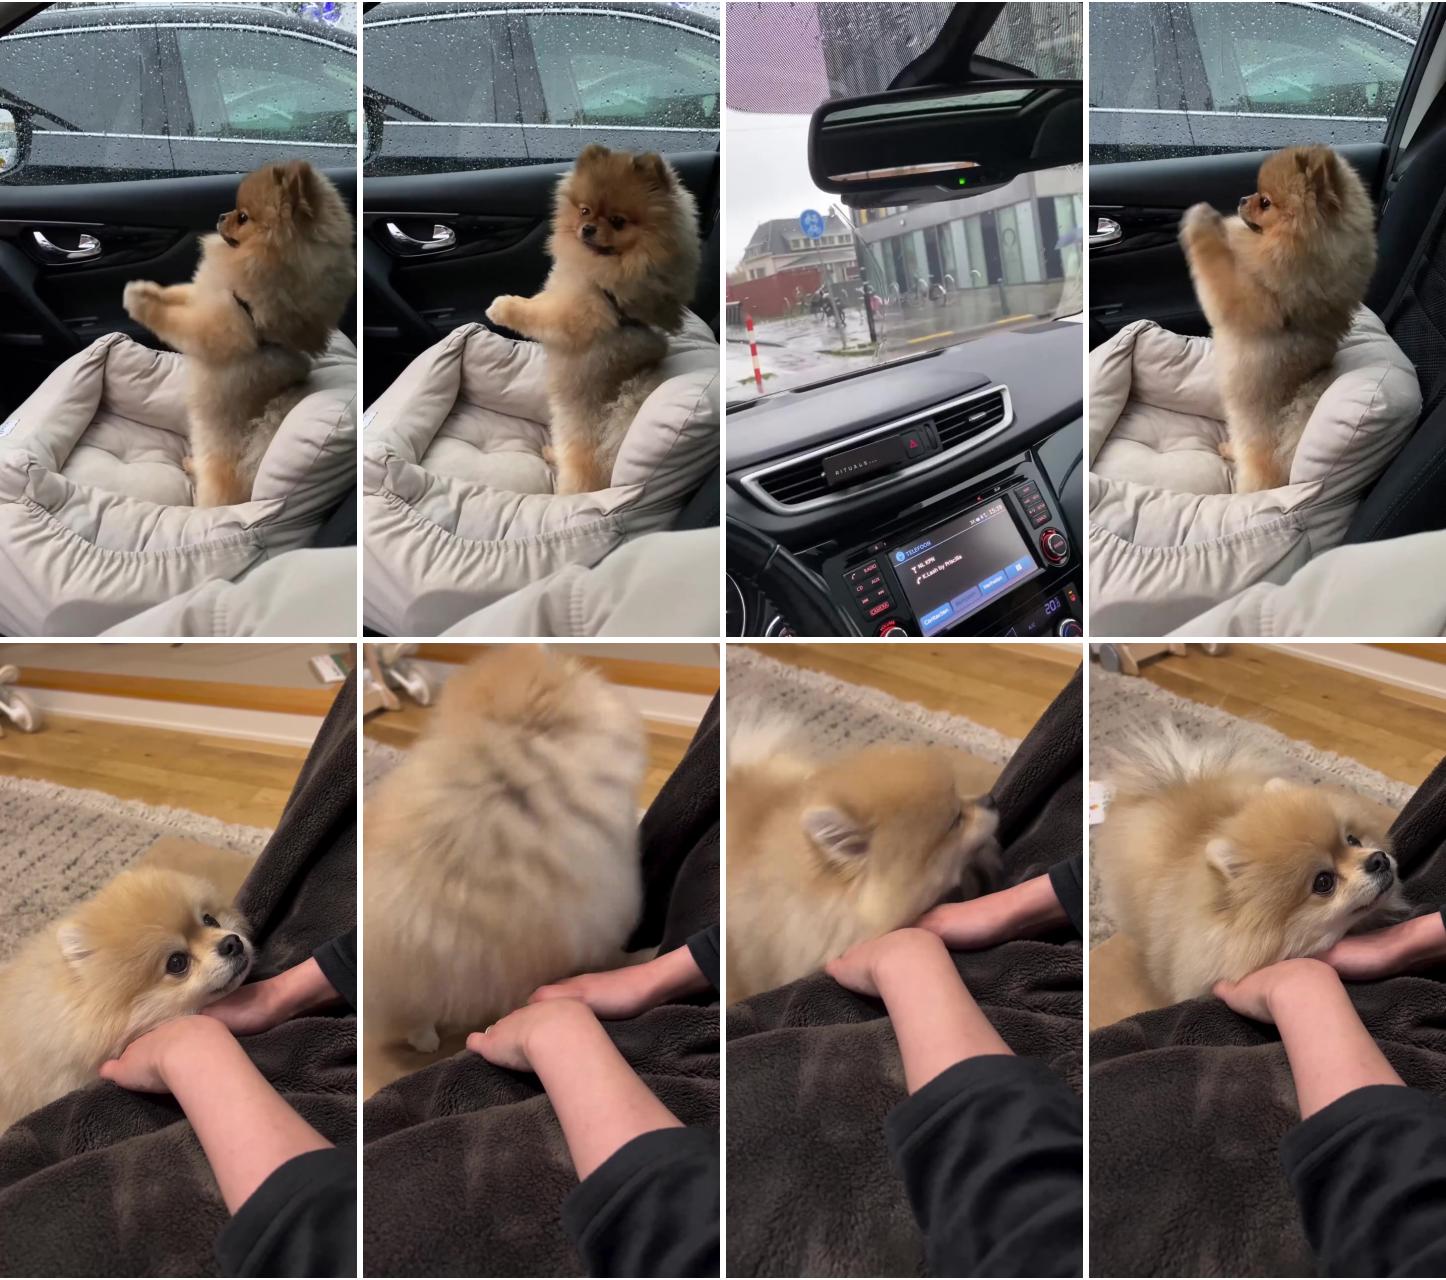 Pomeranian bliss: adorable puppy enjoys a car ride, cute dog video; adorable pomeranian puppy begs for treats from dad, cute dog video pin 